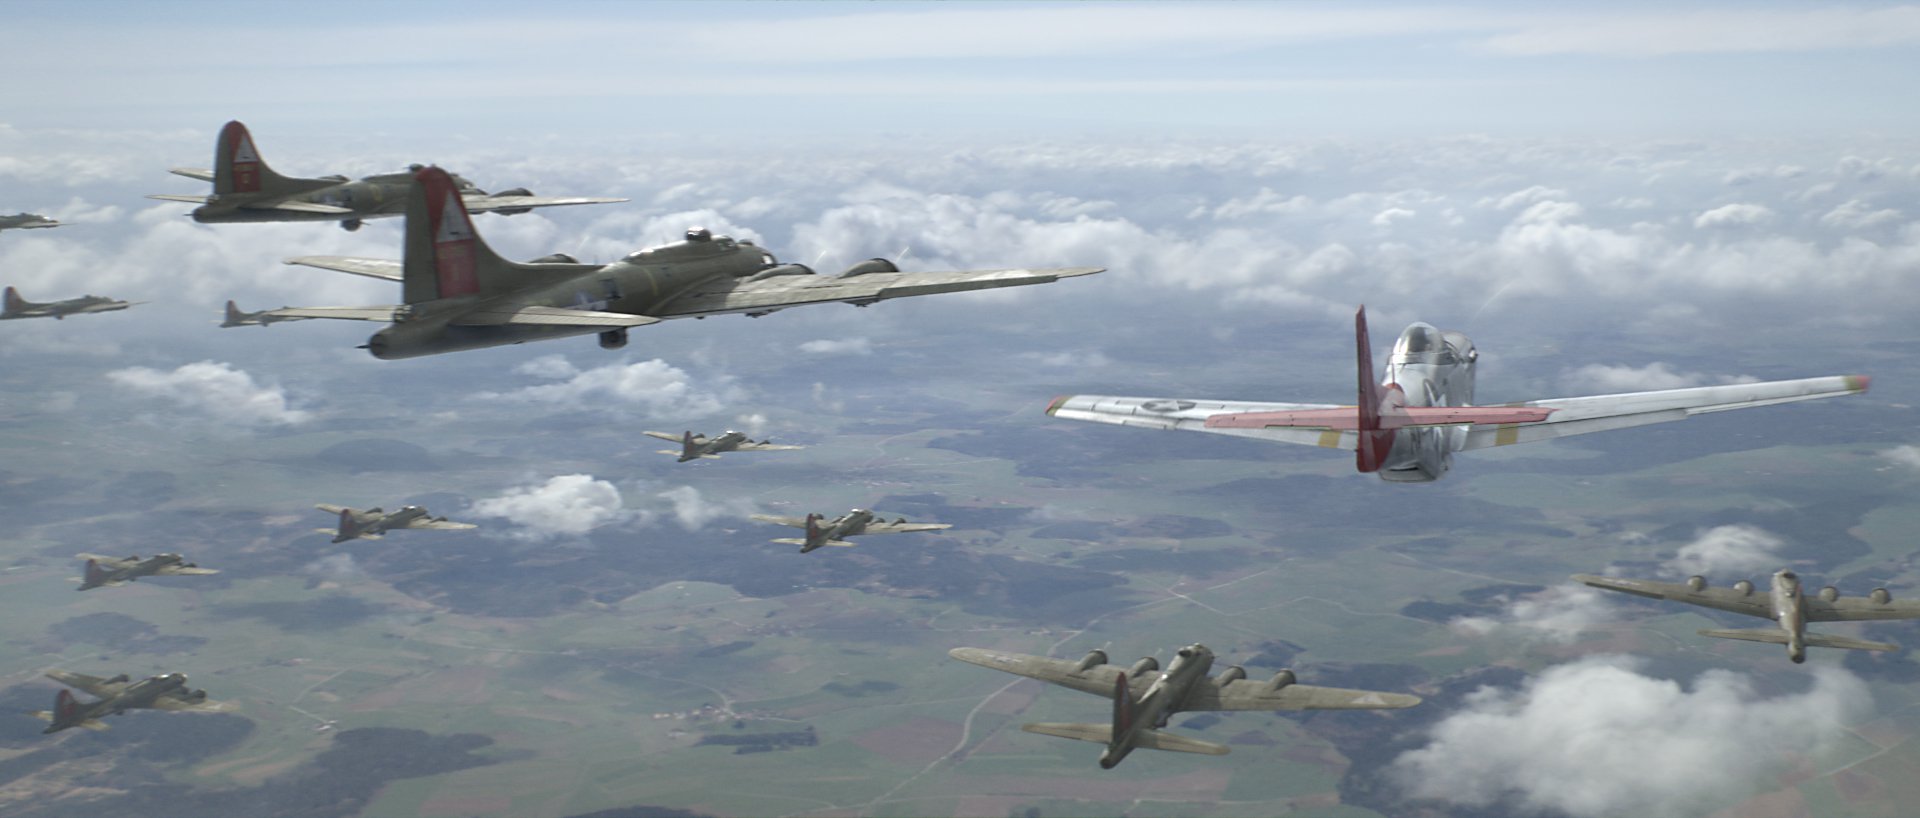 Red Tails High Quality Background on Wallpapers Vista